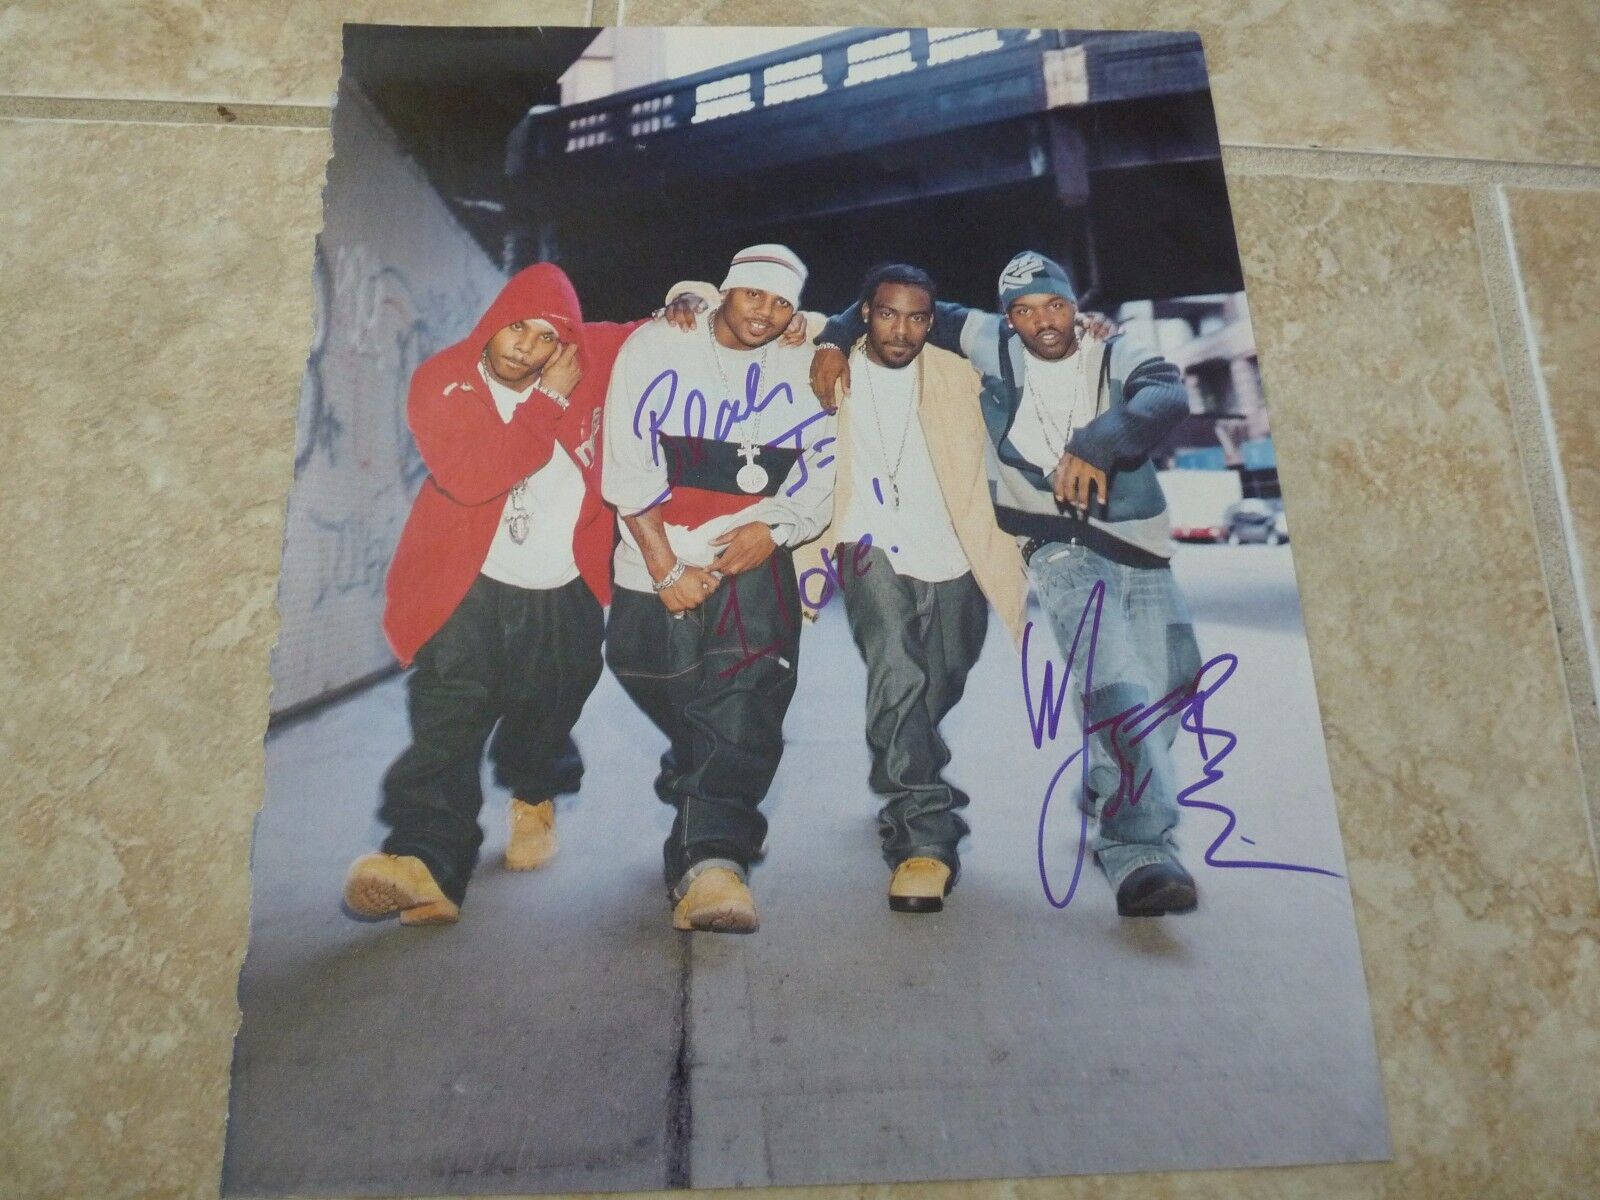 Jagged Edge Signed Autographed x2 8x11 Magazine Page Photo Poster painting PSA Guaranteed #1 F6